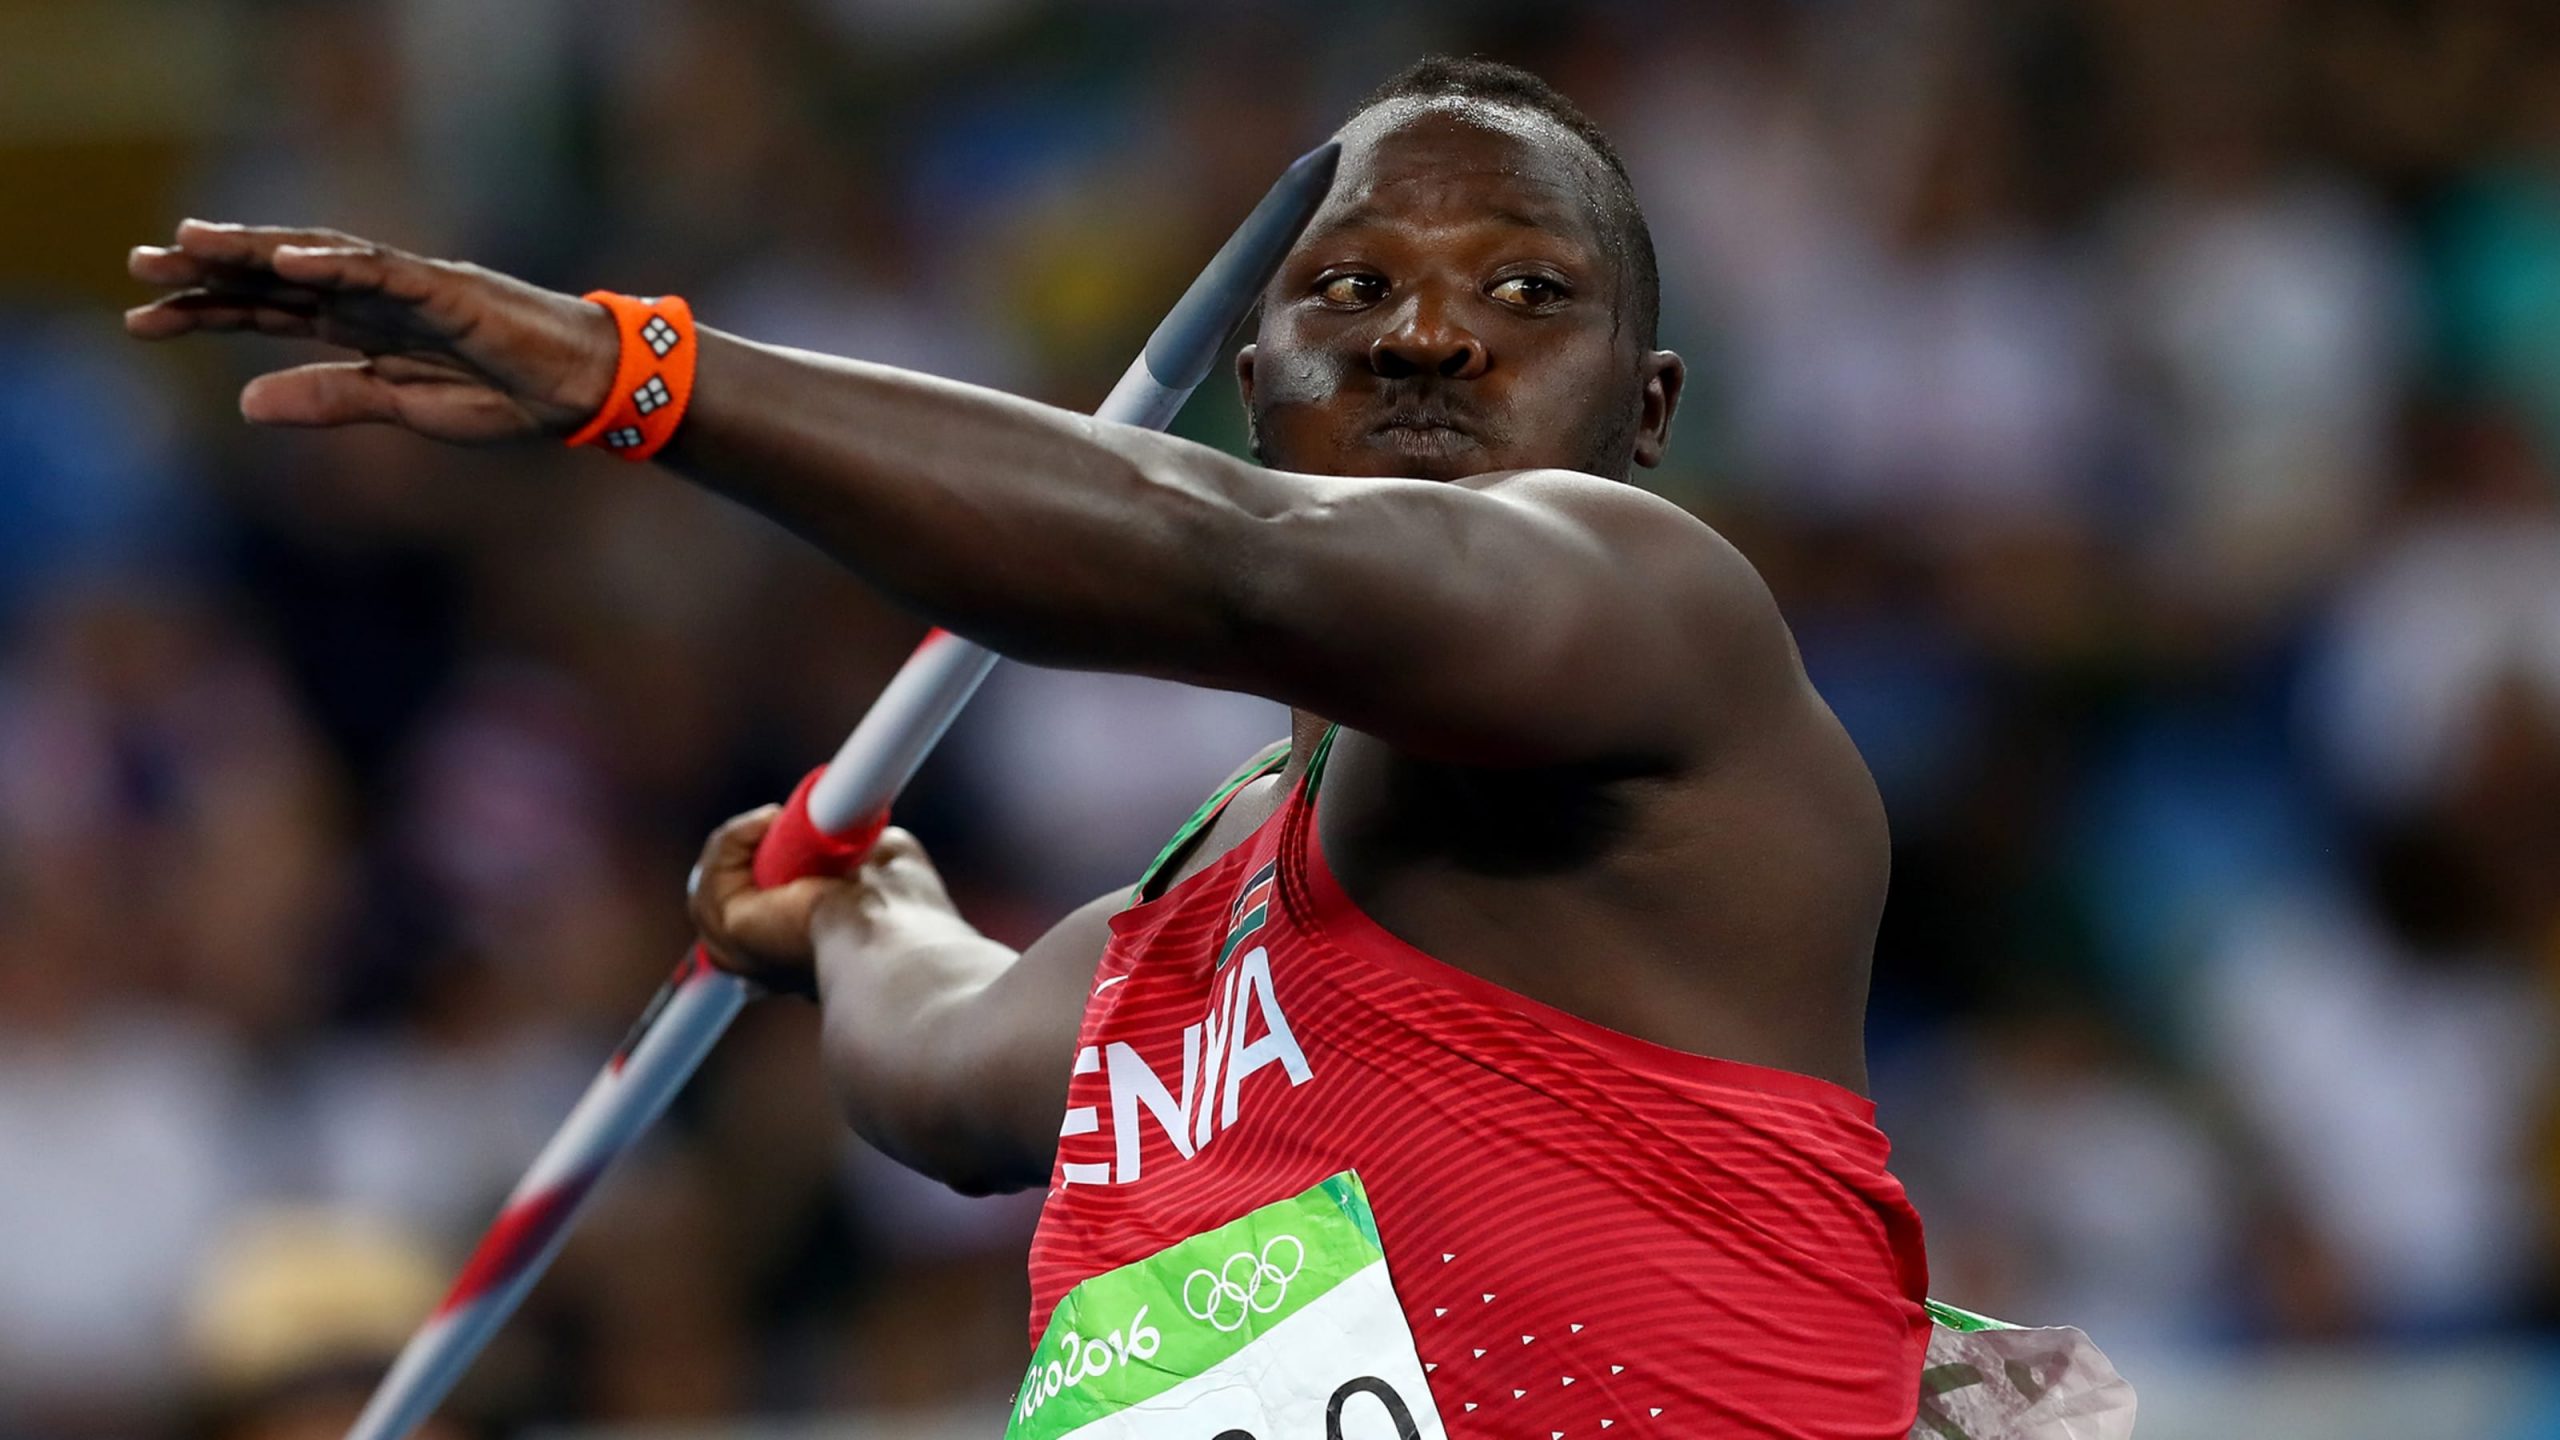 A look back at Julius Yego: The Kenyan gold medalist who self-taught javelin throwing using YouTube